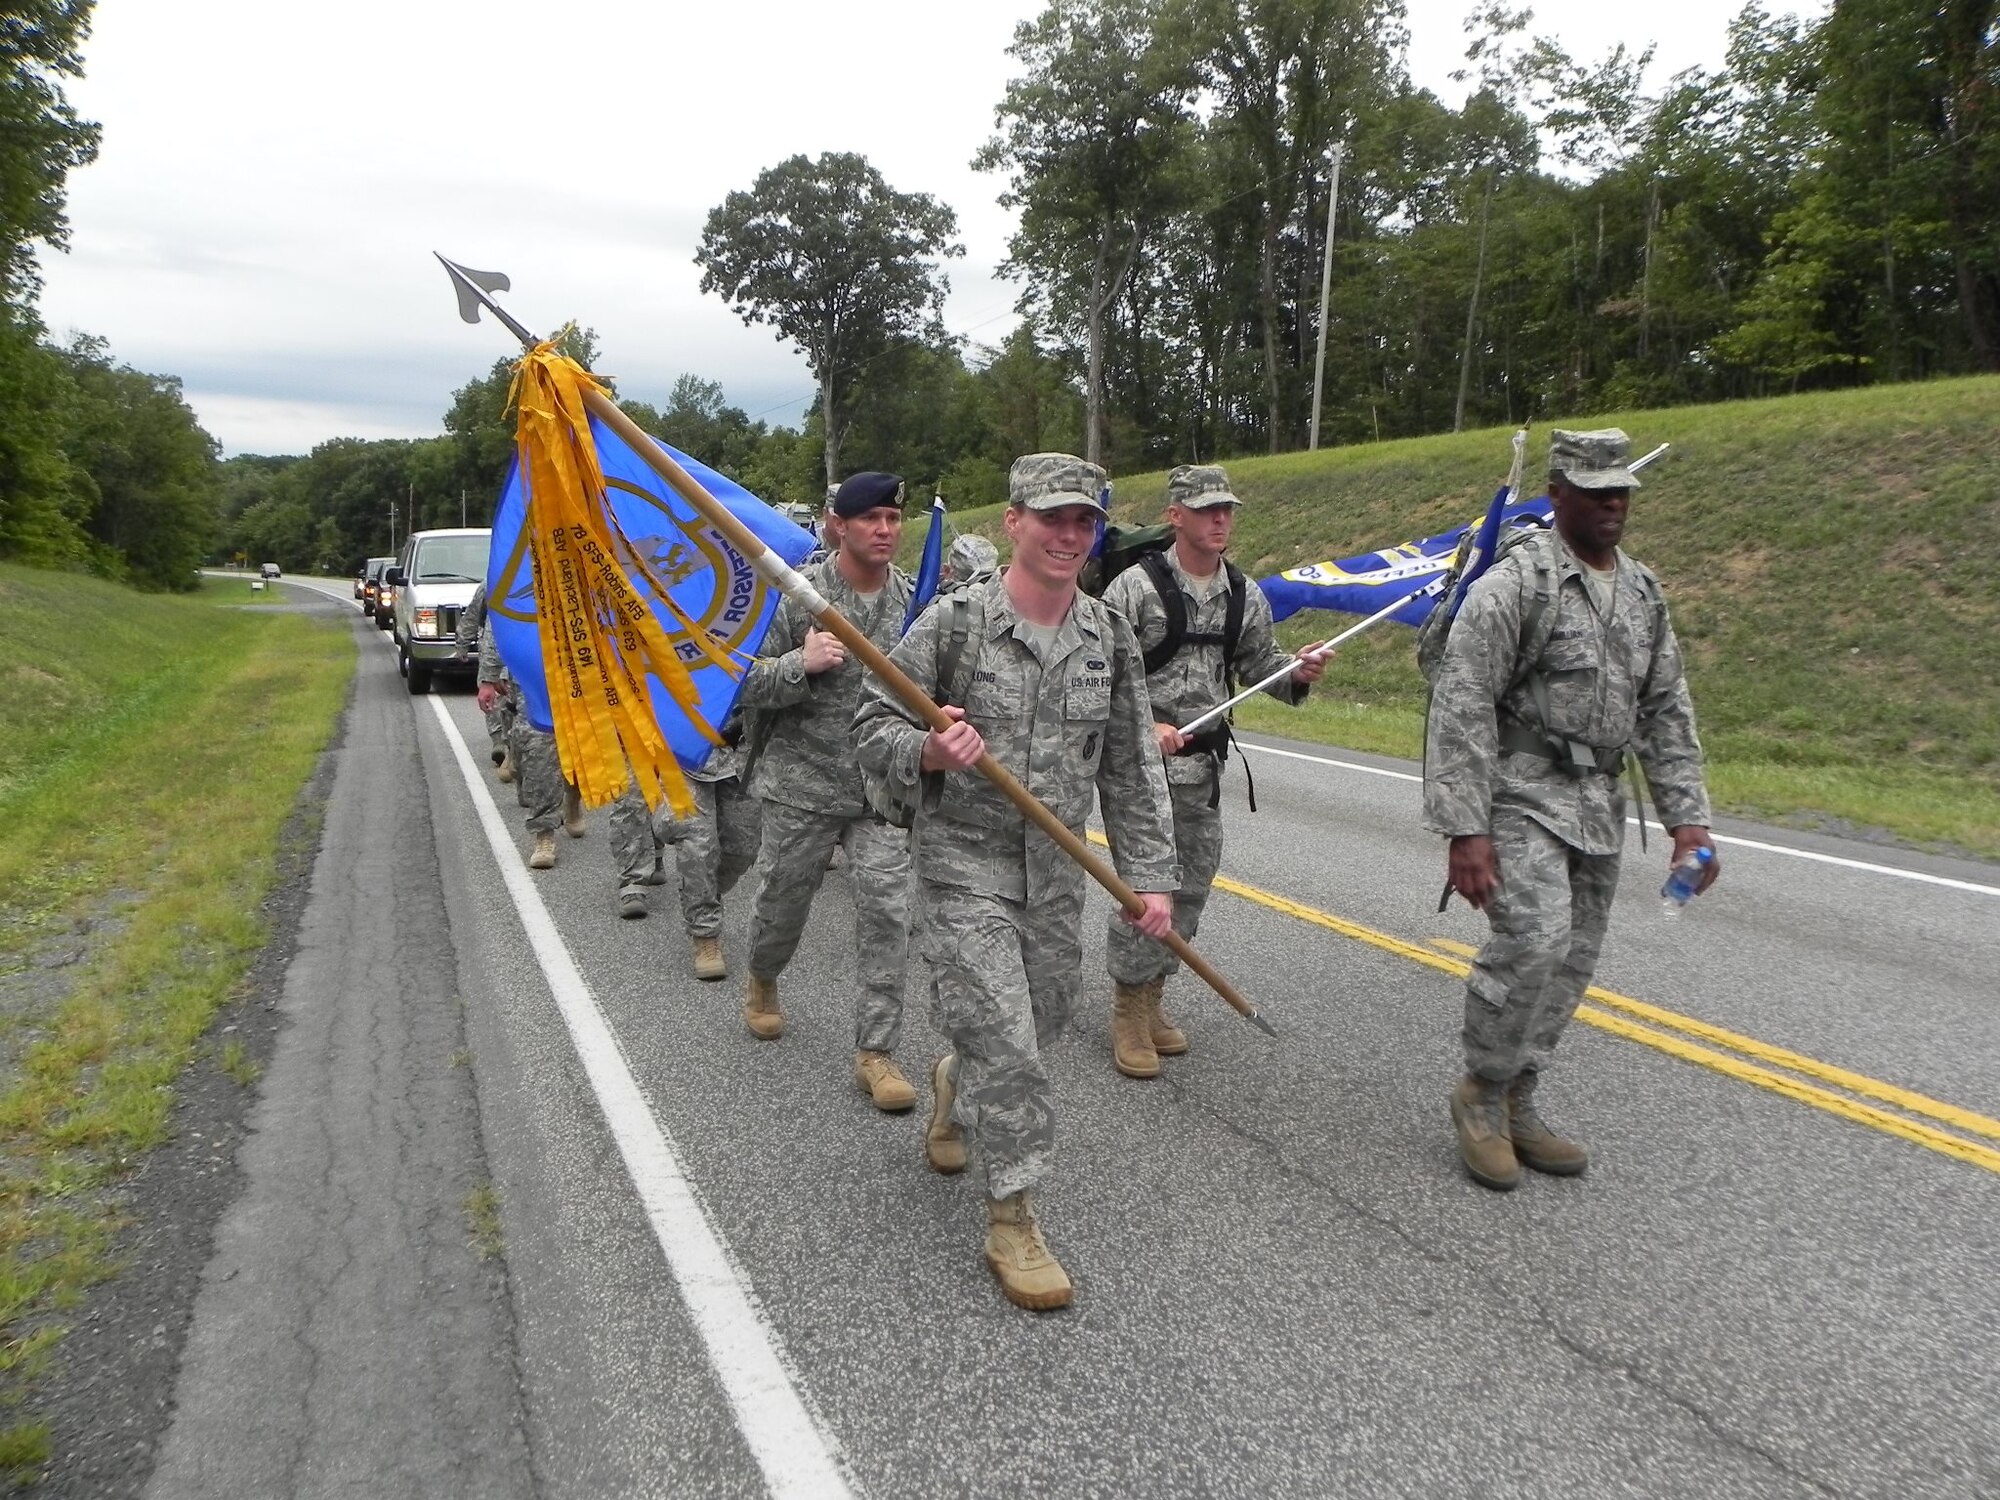 Brig. Gen. Jimmy McMillian, headquarters director of Security Forces, and 2nd Lt. Sean Long, 11th Security Forces Squadron flight commander, lead the way during the Ruck March to Remember.  Team Andrews defenders marched the guidon more than 150 miles from West Virginia to Pennsylvania. (courtesy photo)